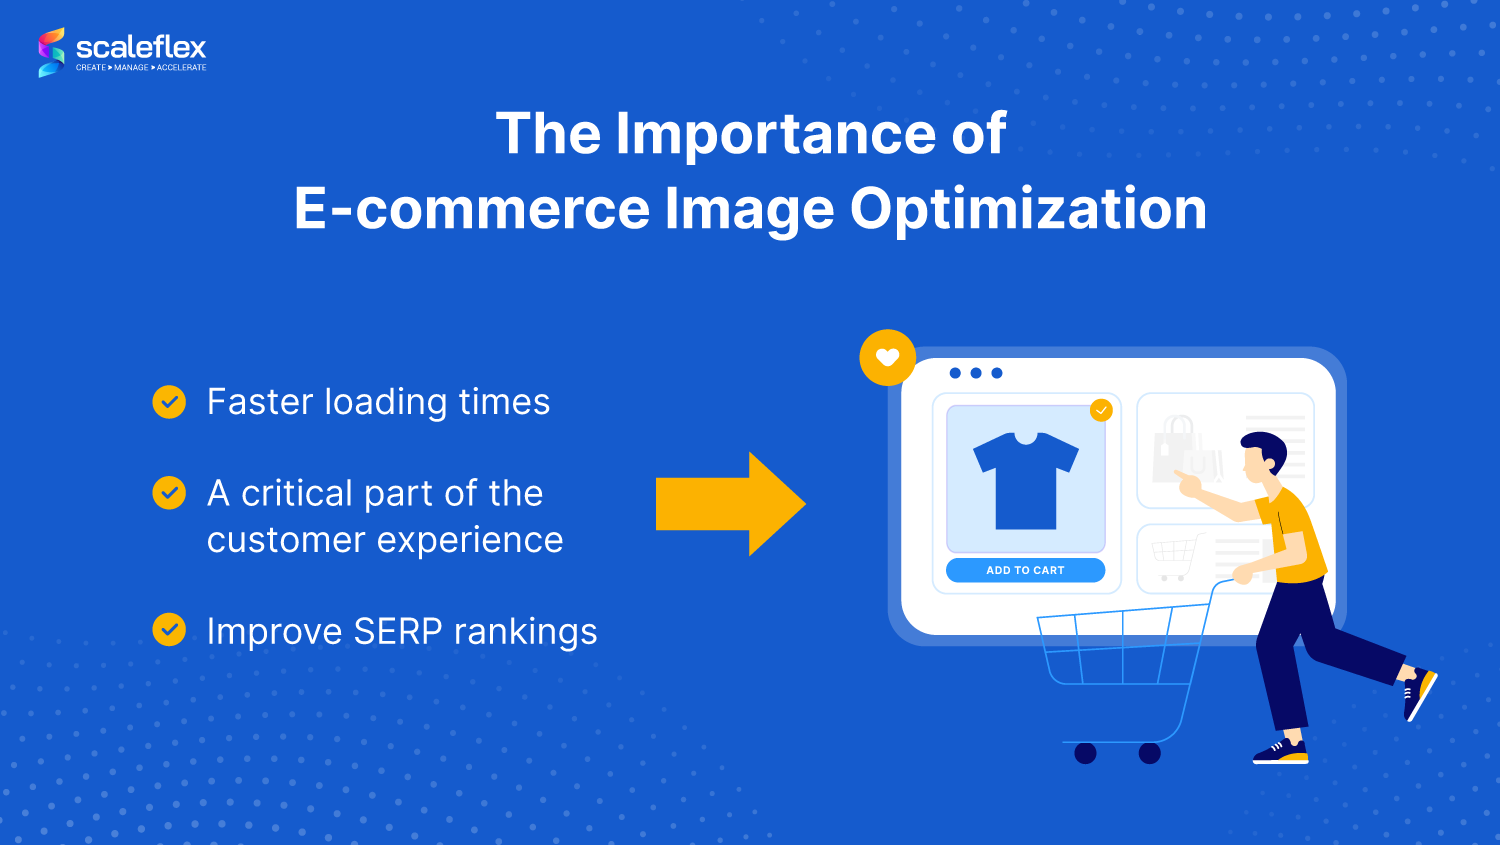 Why is e-commerce image optimization important?